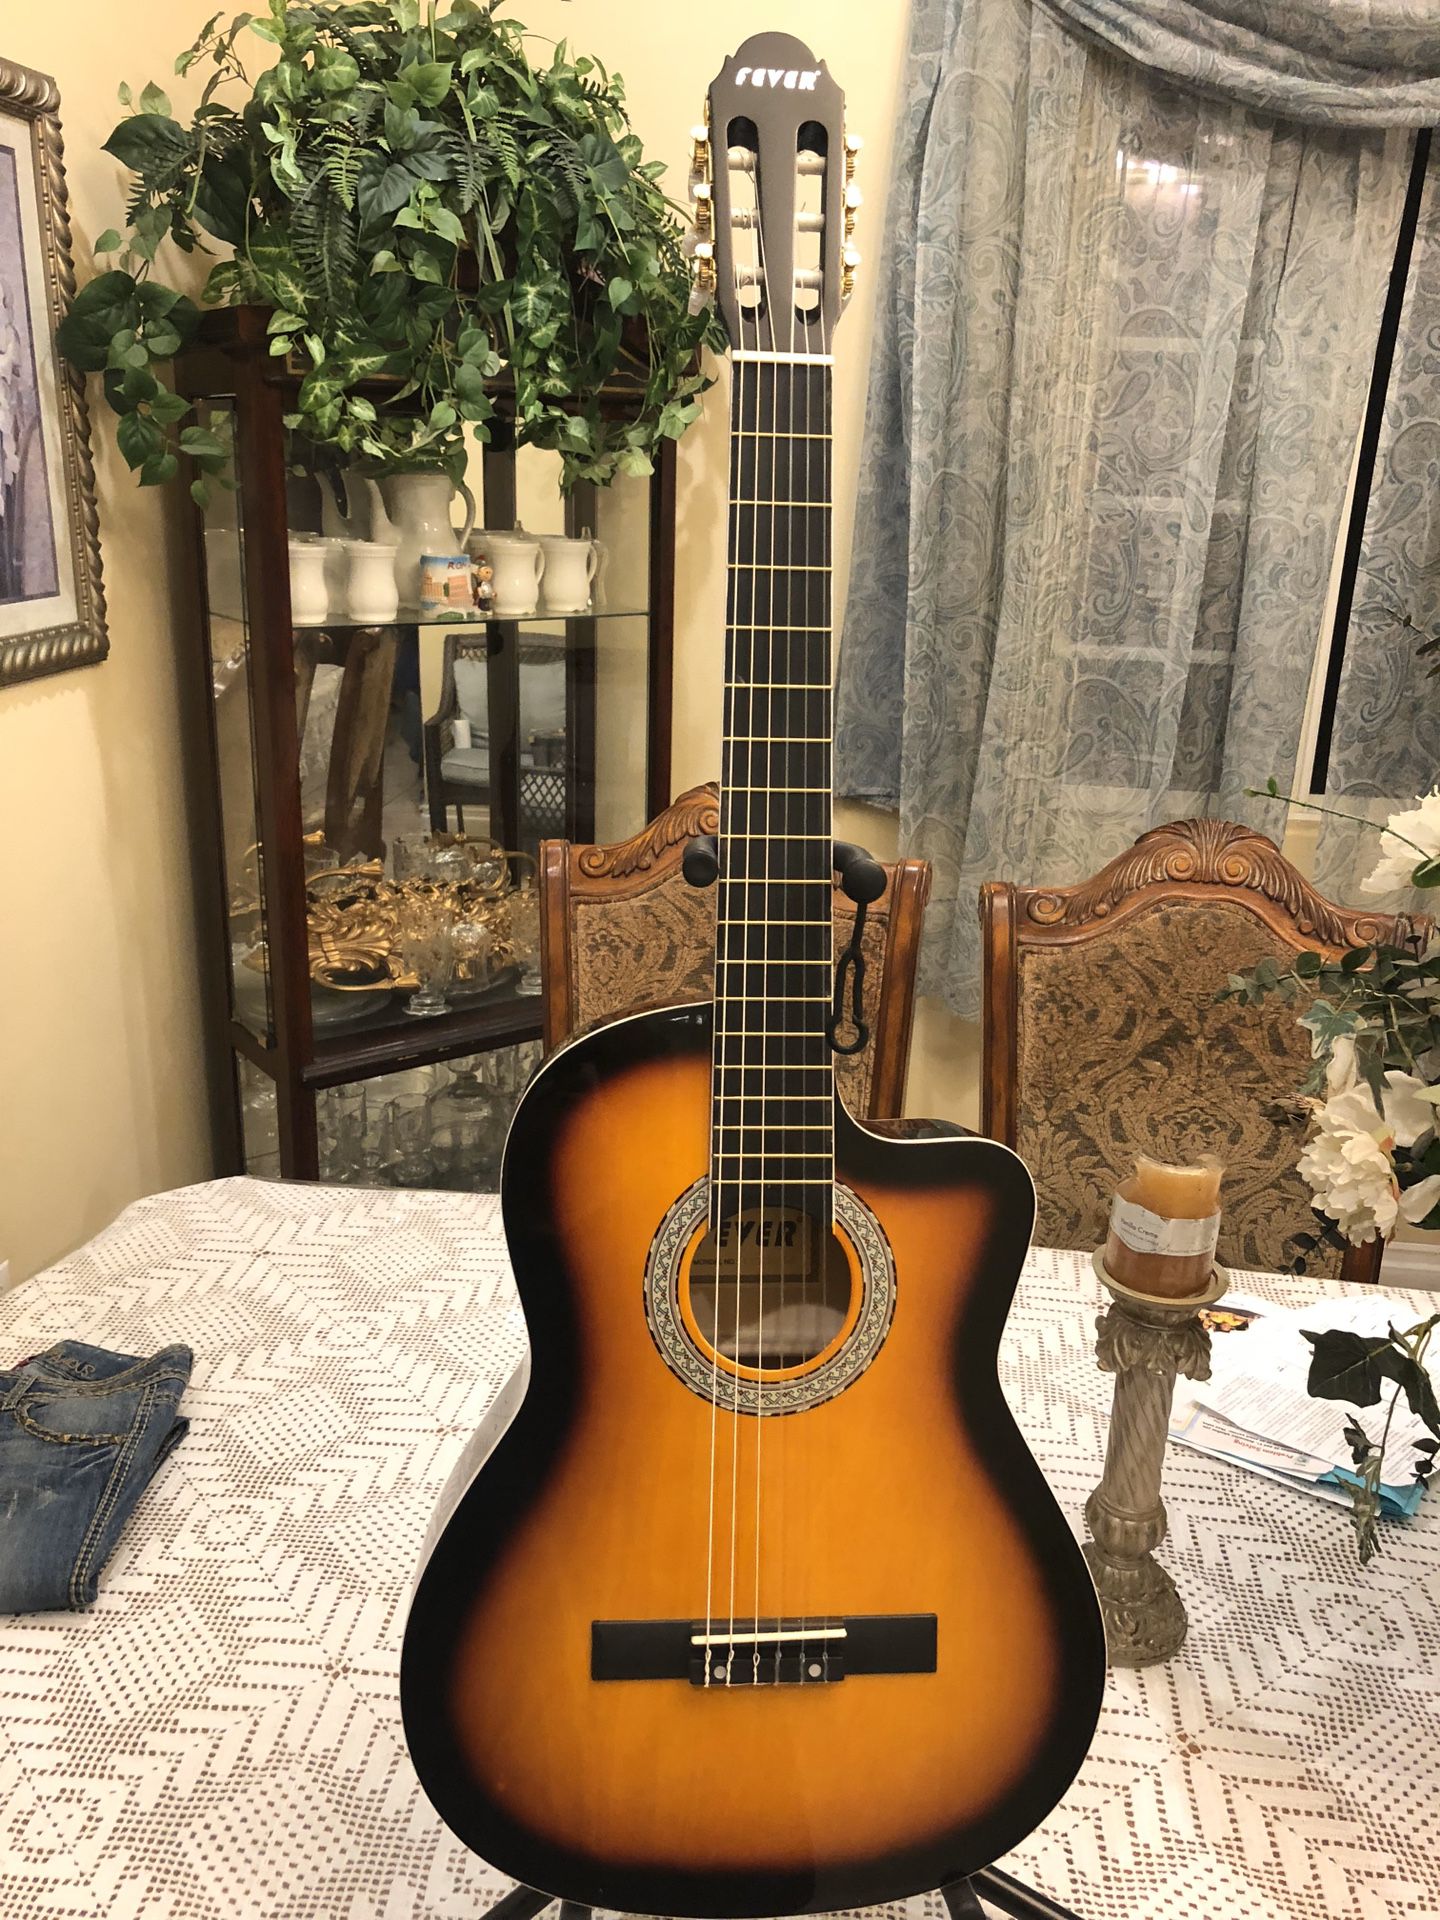 Fever classic acoustic guitar with nylon strings